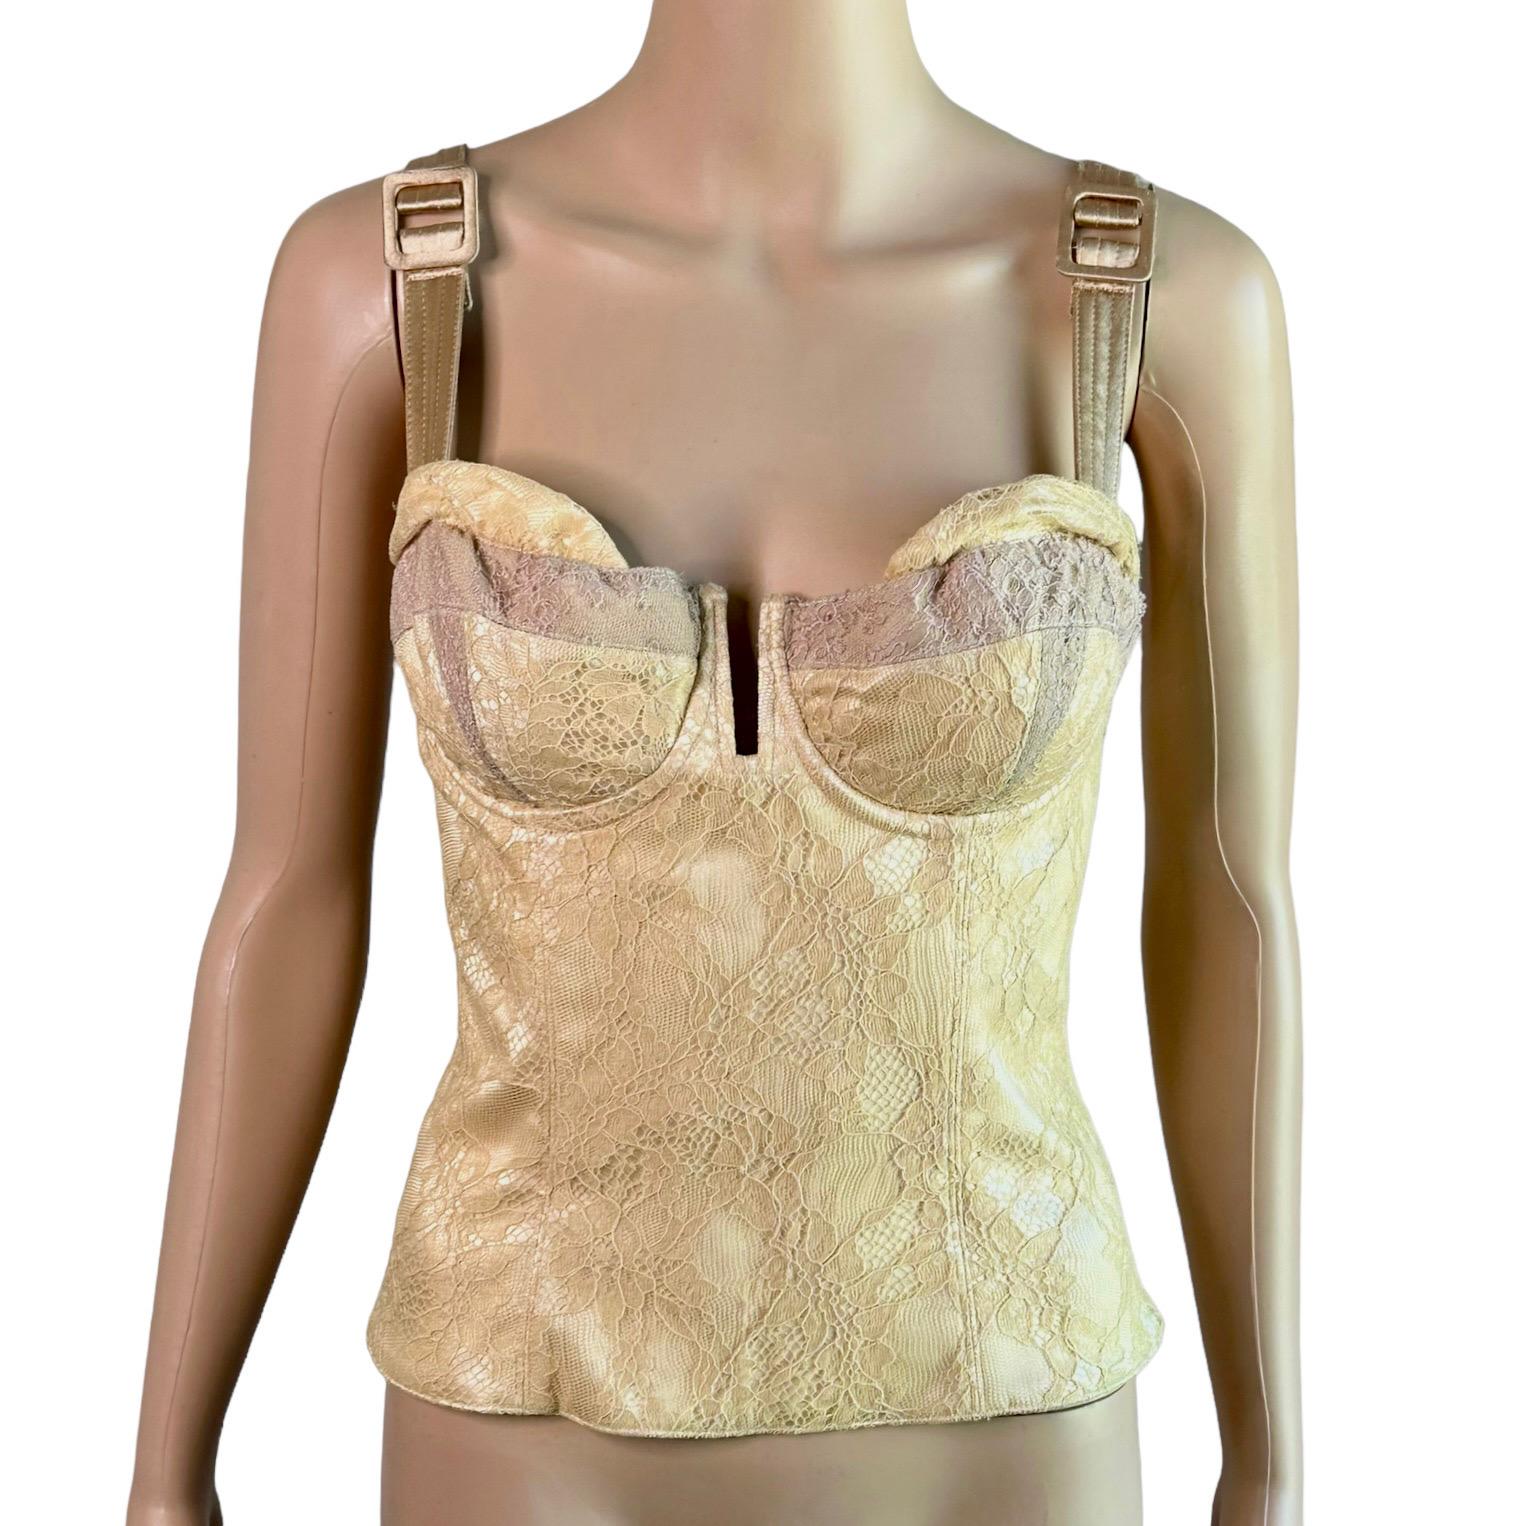 Christian Dior By John Galliano S/S 2004 Runway Bustier Lace Corset Crop Top For Sale 3